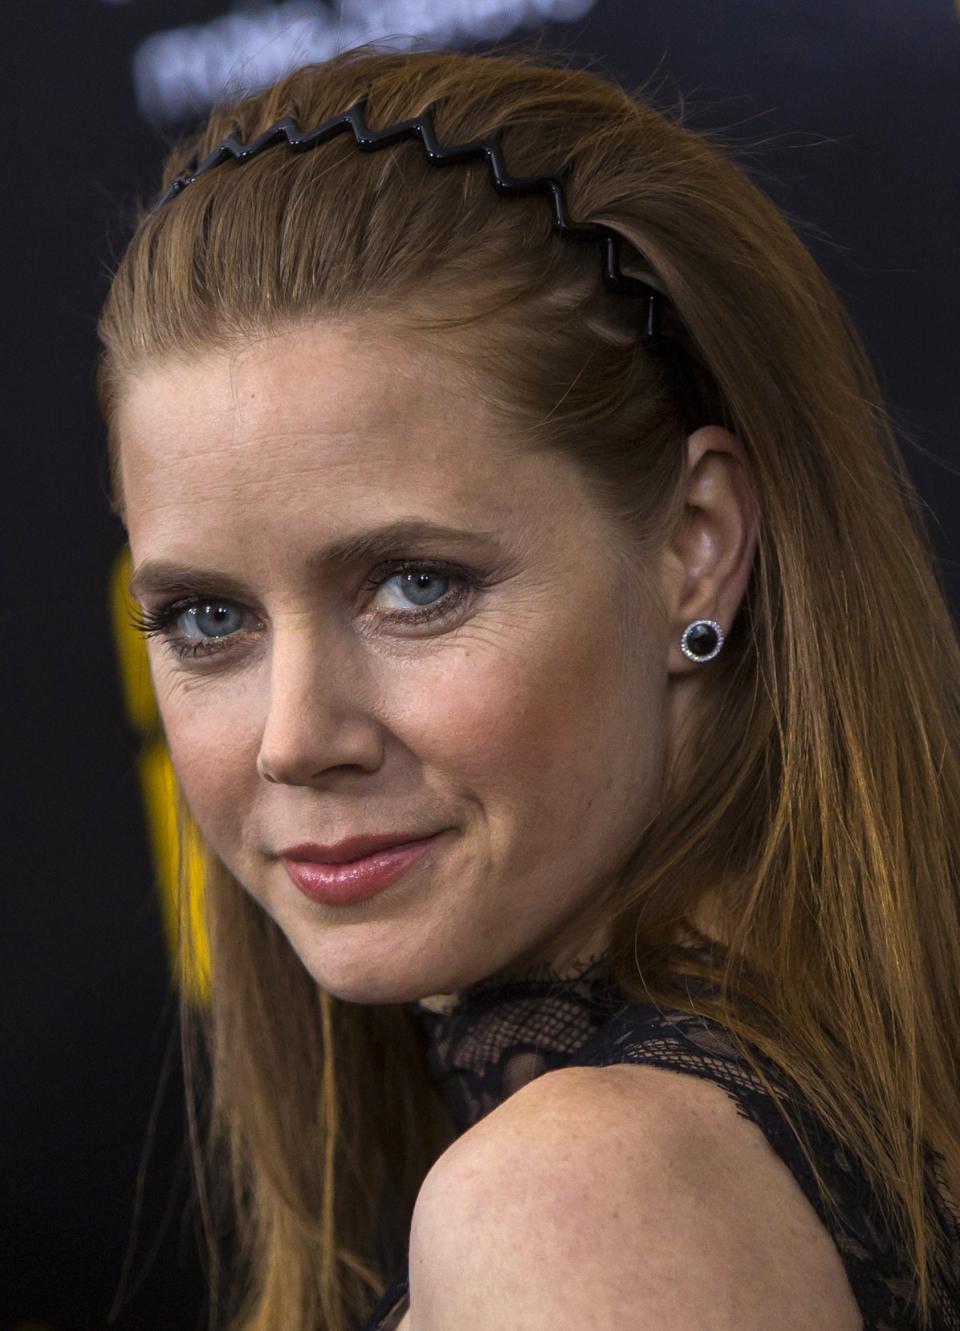 File photo of actress Amy Adams attending the premiere for the film "American Hustle" in New York